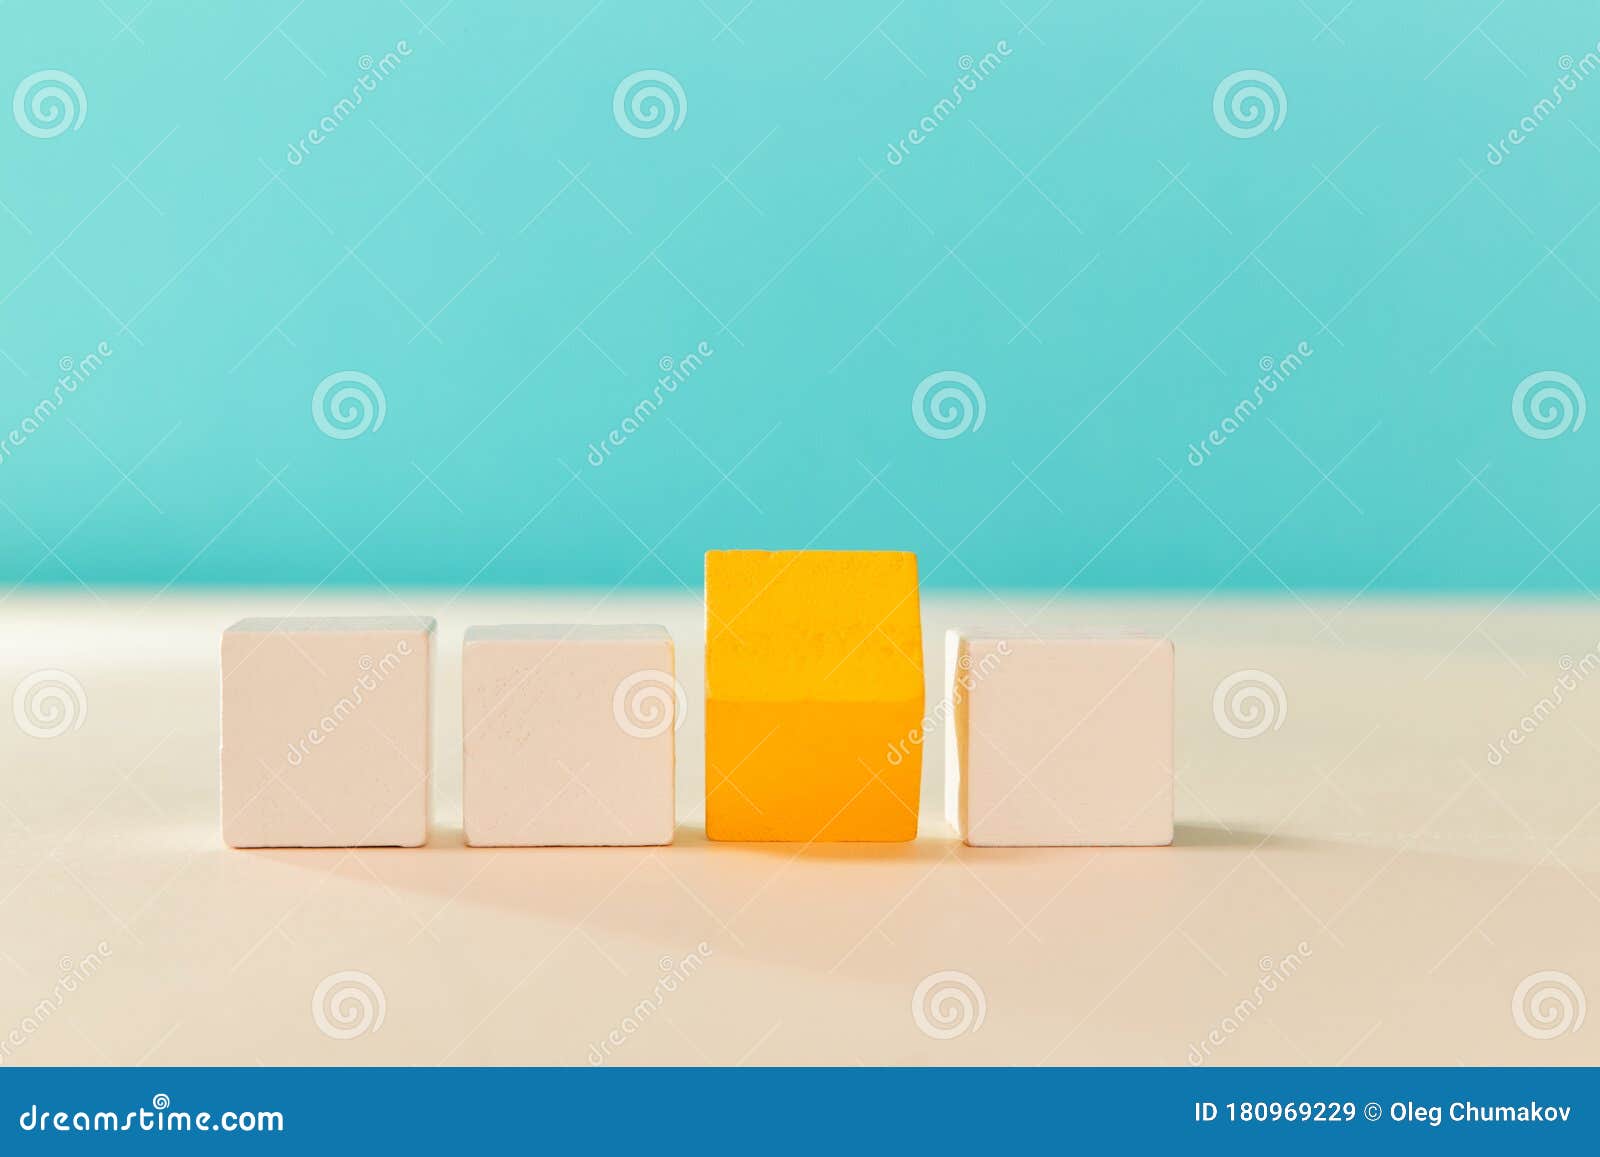 Download Wooden Cubes Mockup. Design Template For Creative Styling. Blank Blocks In Line,one Inverted ...